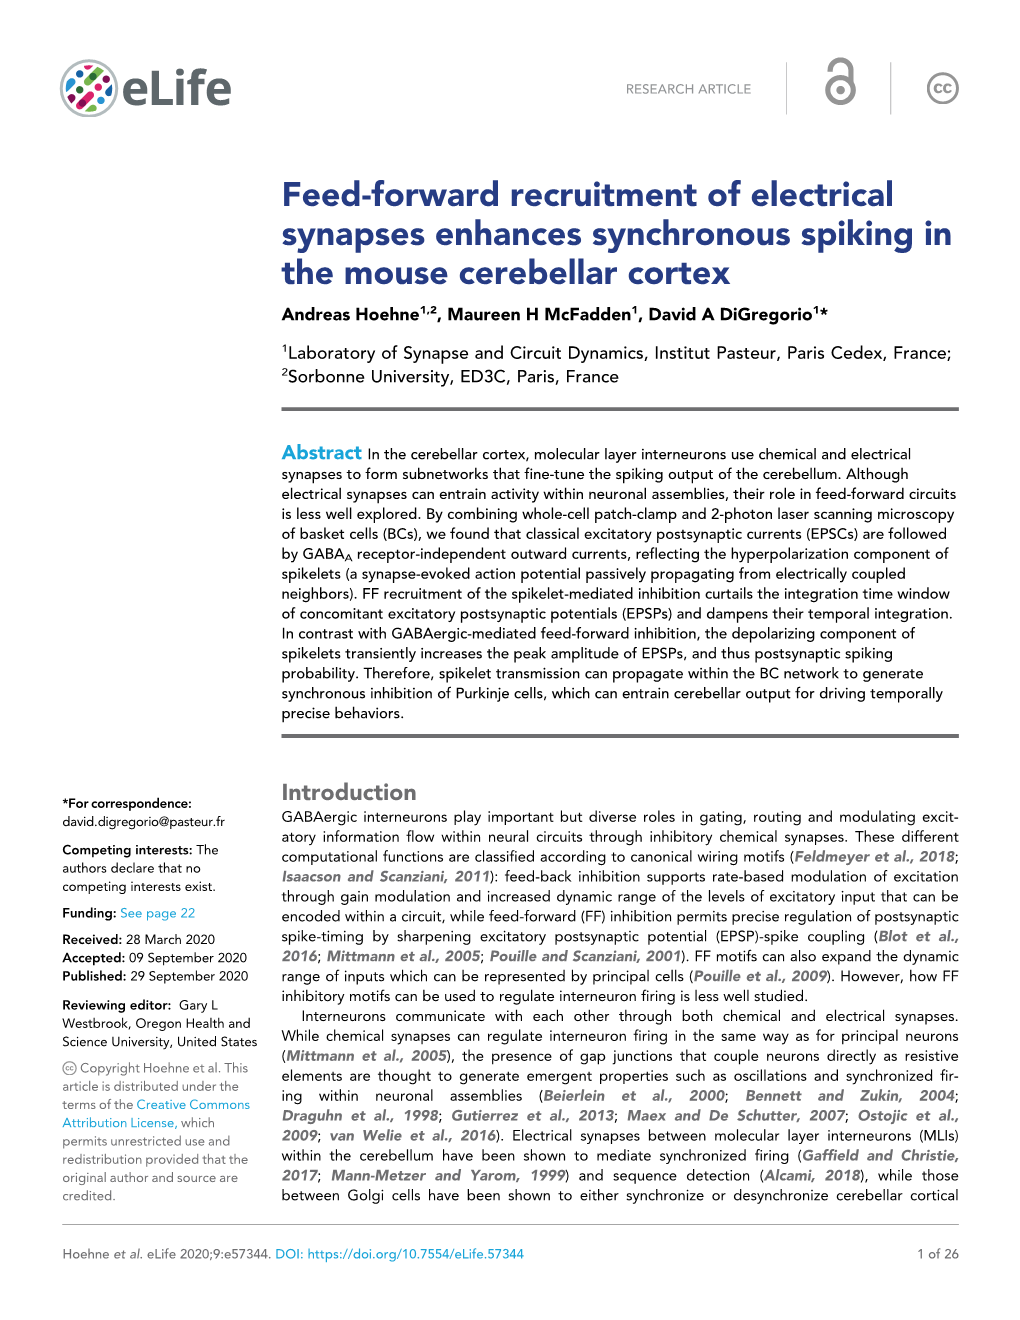 Feed-Forward Recruitment of Electrical Synapses Enhances